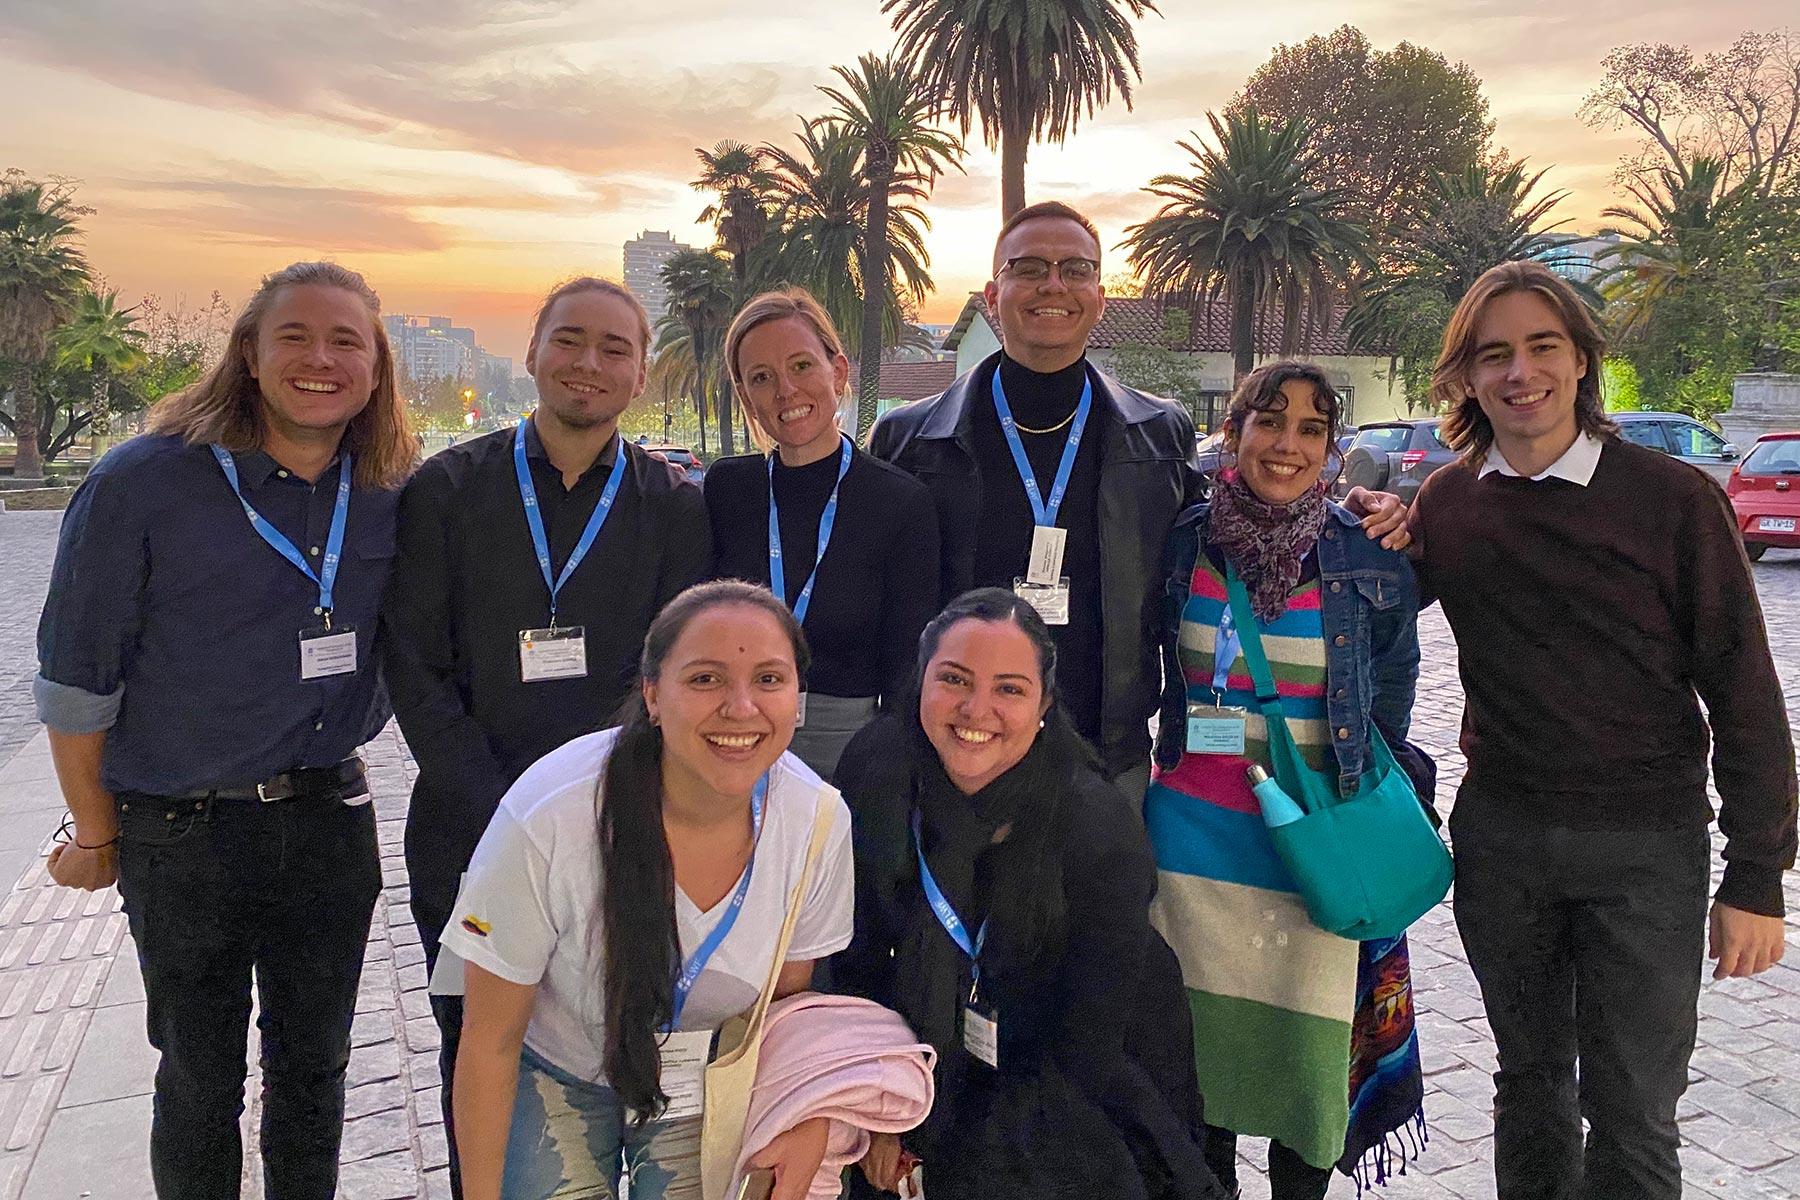 Youth delegates at the May 2022 LWF Leadership Conference of the Americas in Santiago, Chile. Photo: LWF/E. Albrecht